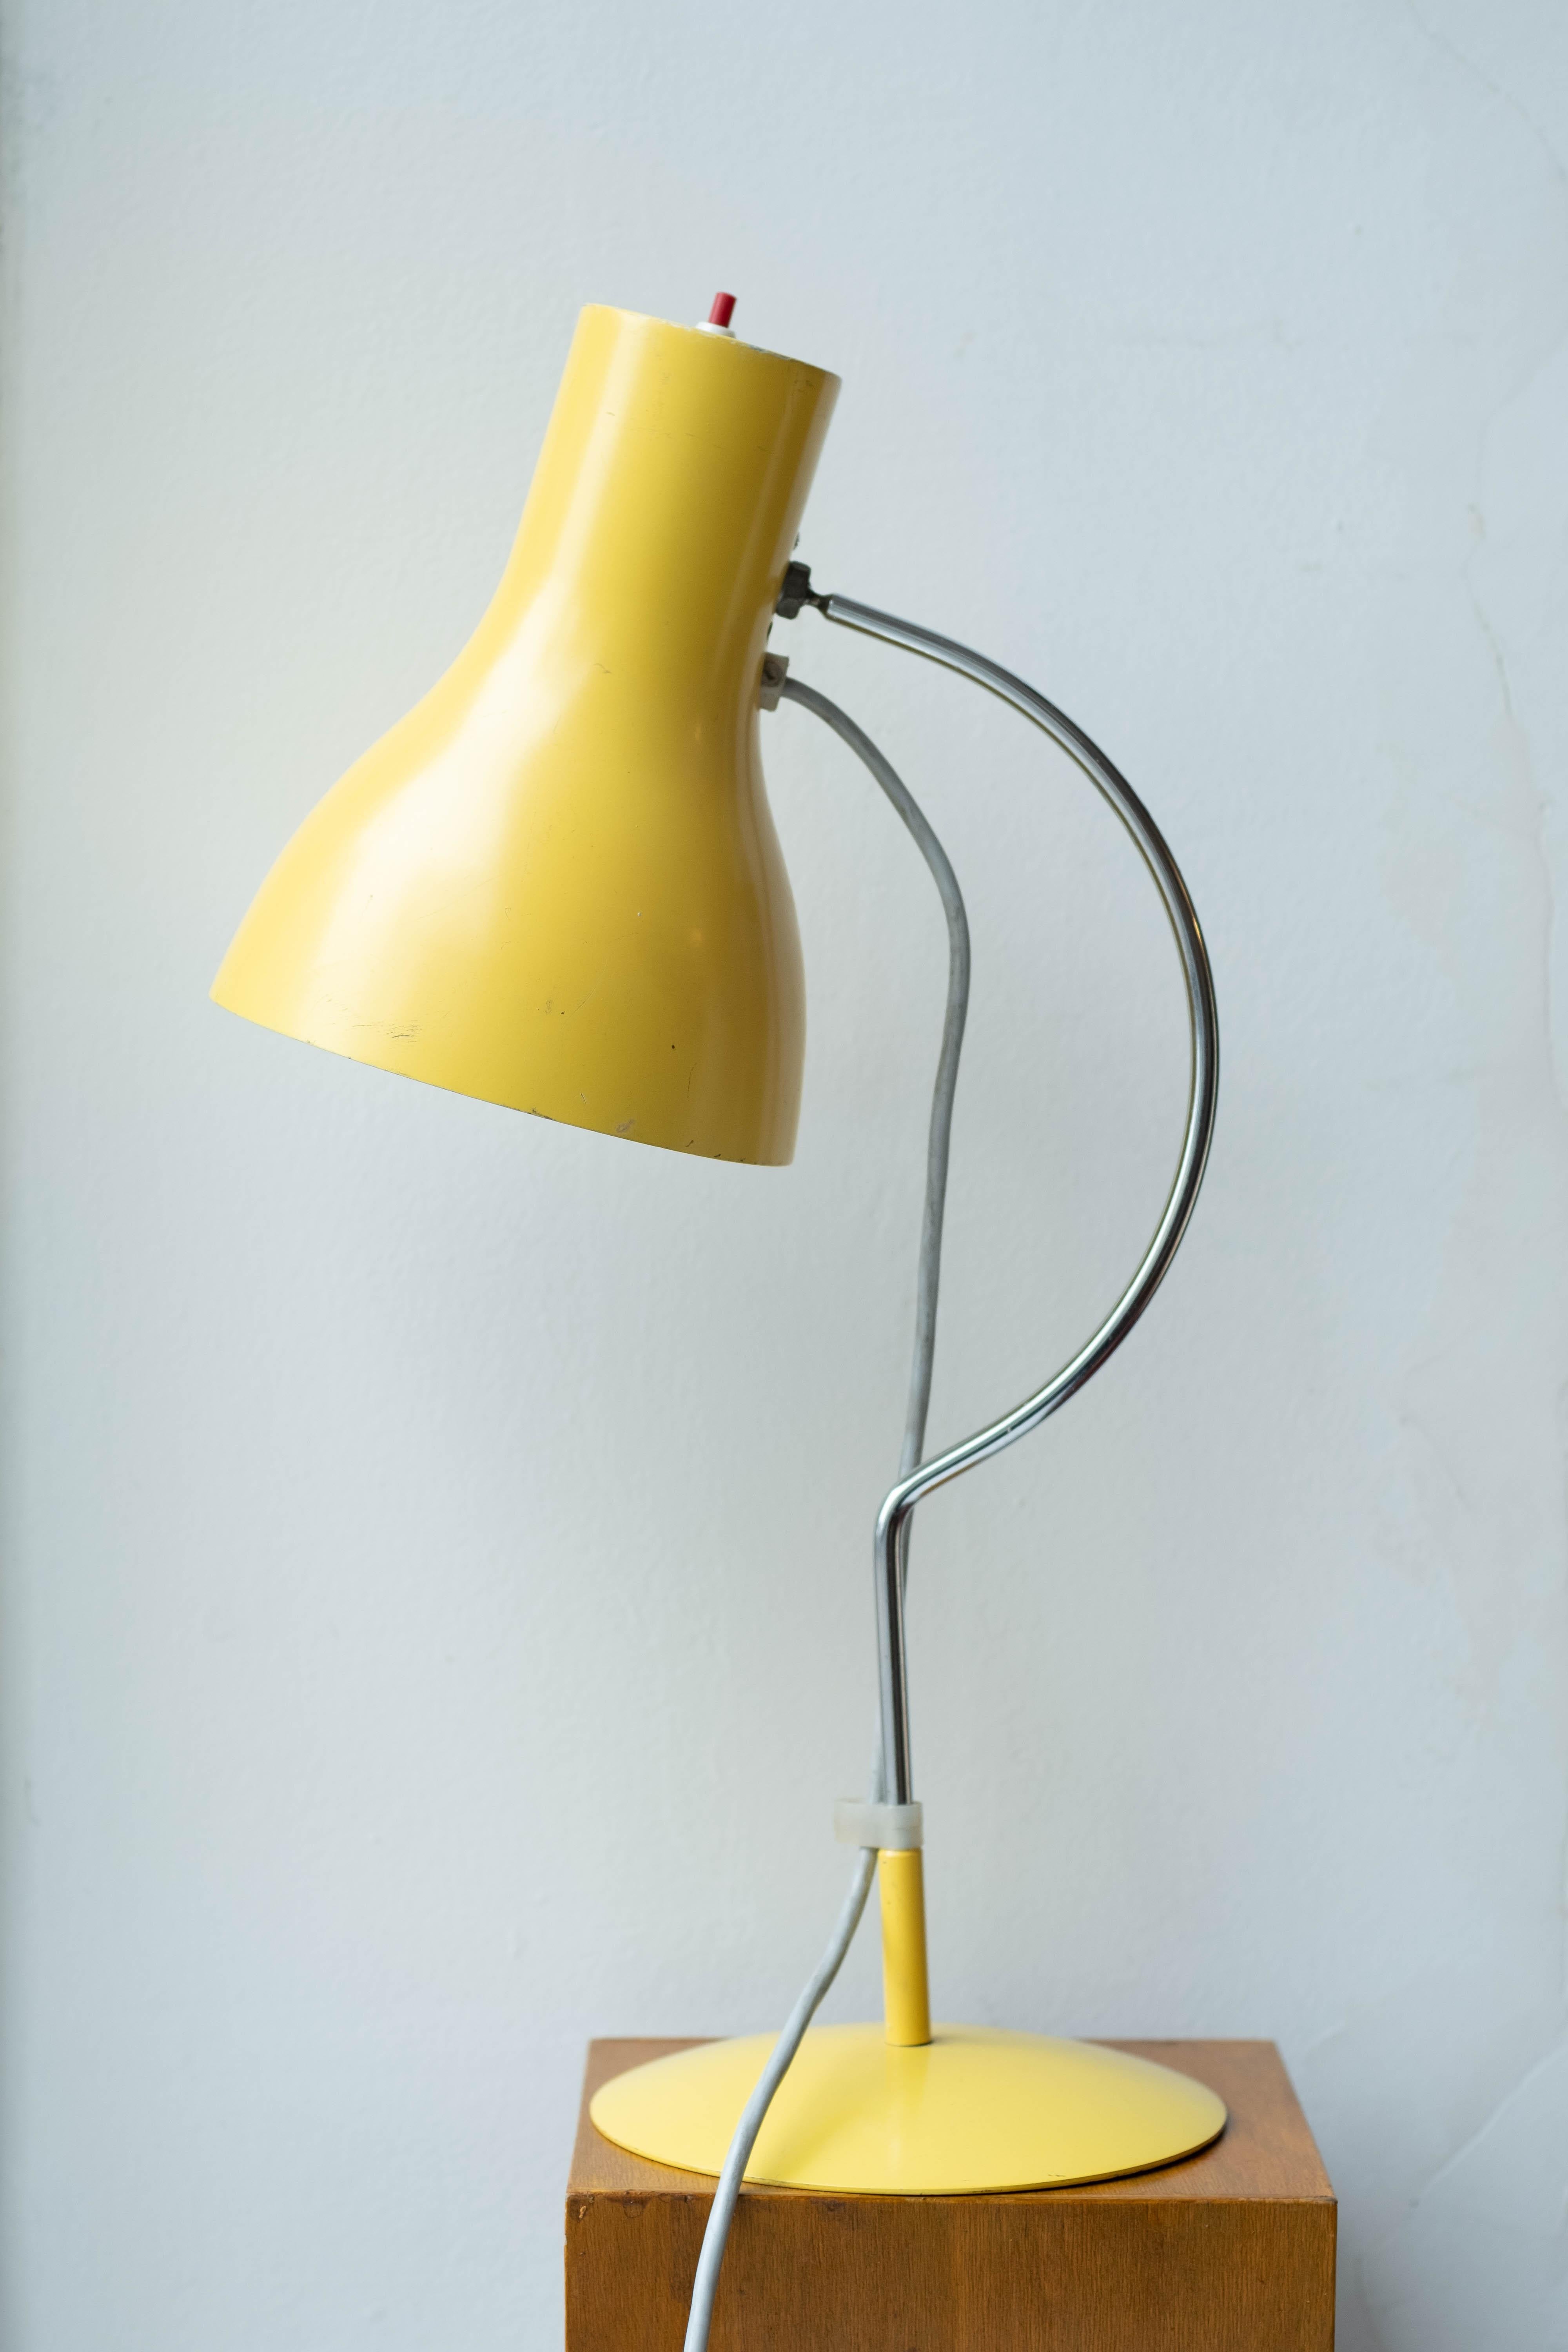 Mid-Century Modern Midcentury Yellow Table Lamp from Chech Designer Josef Hurka, 1970s For Sale